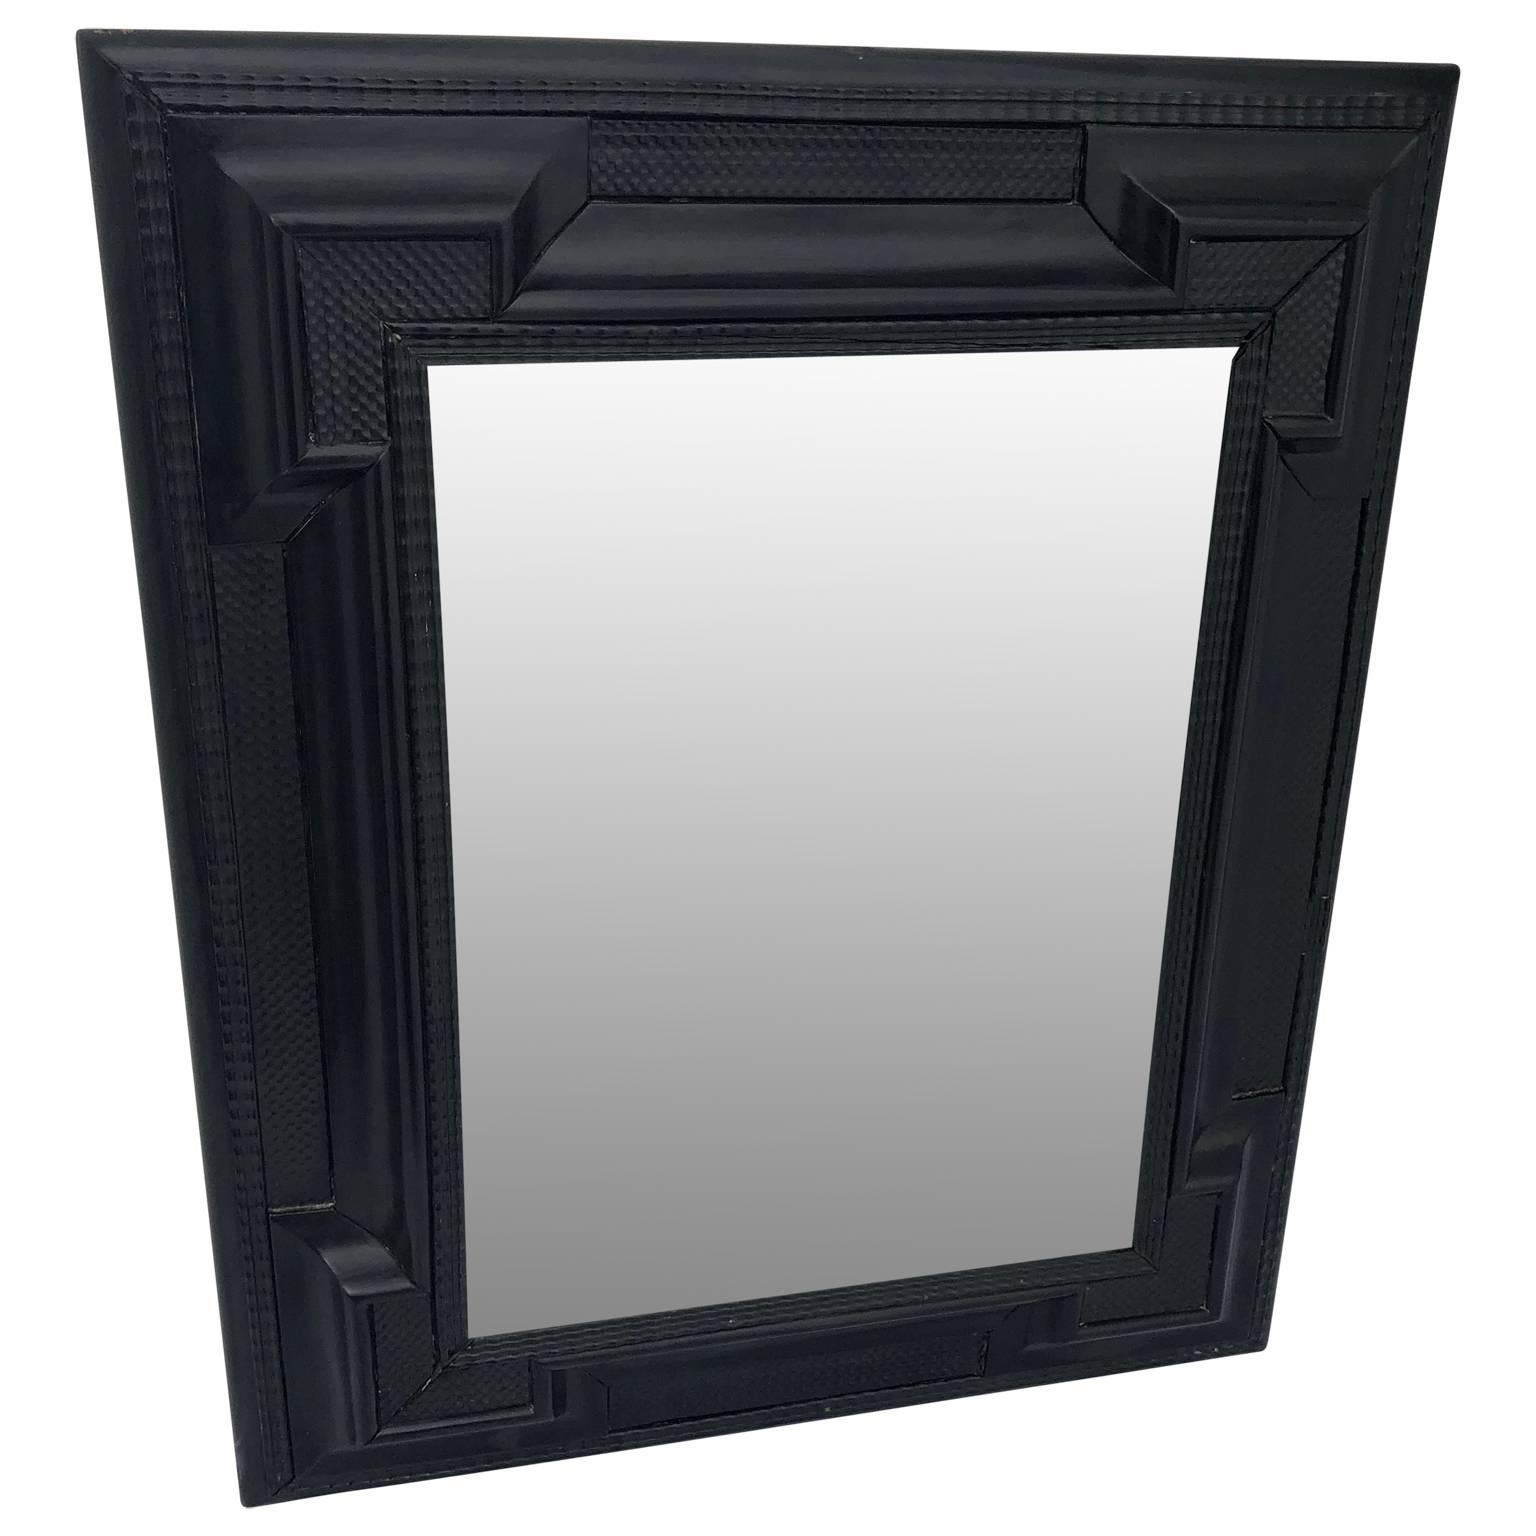 Early Flemish Or Scandinavian Baroque Style Wall Mirror 2